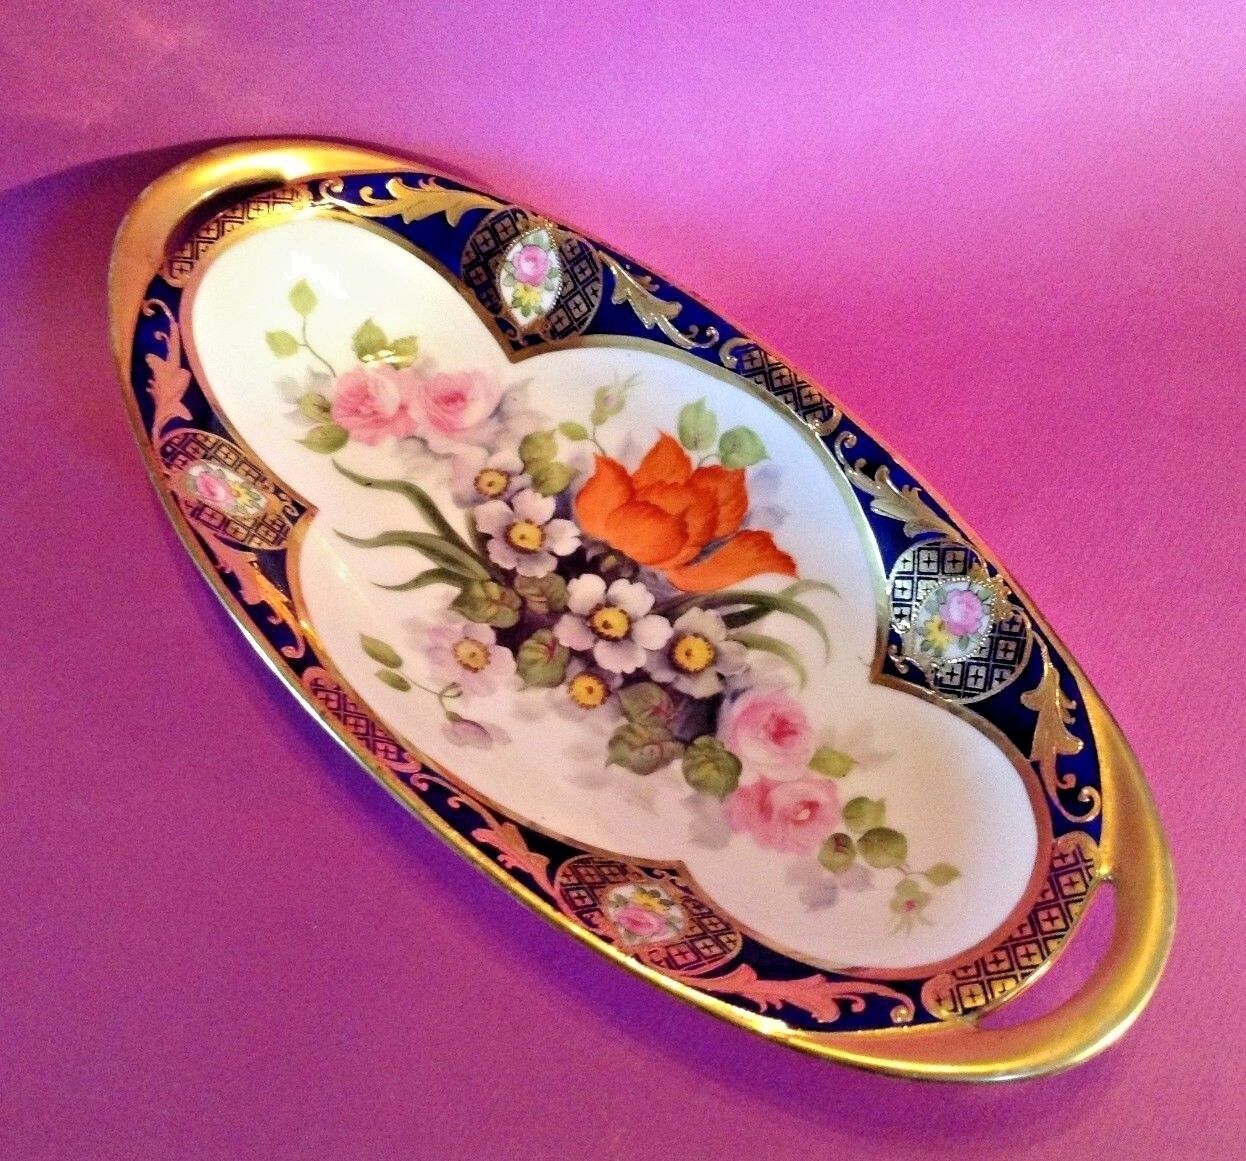 Noritake Hand Painted Celery Dish - Ornate Blue And Gold With Flowers - Japan